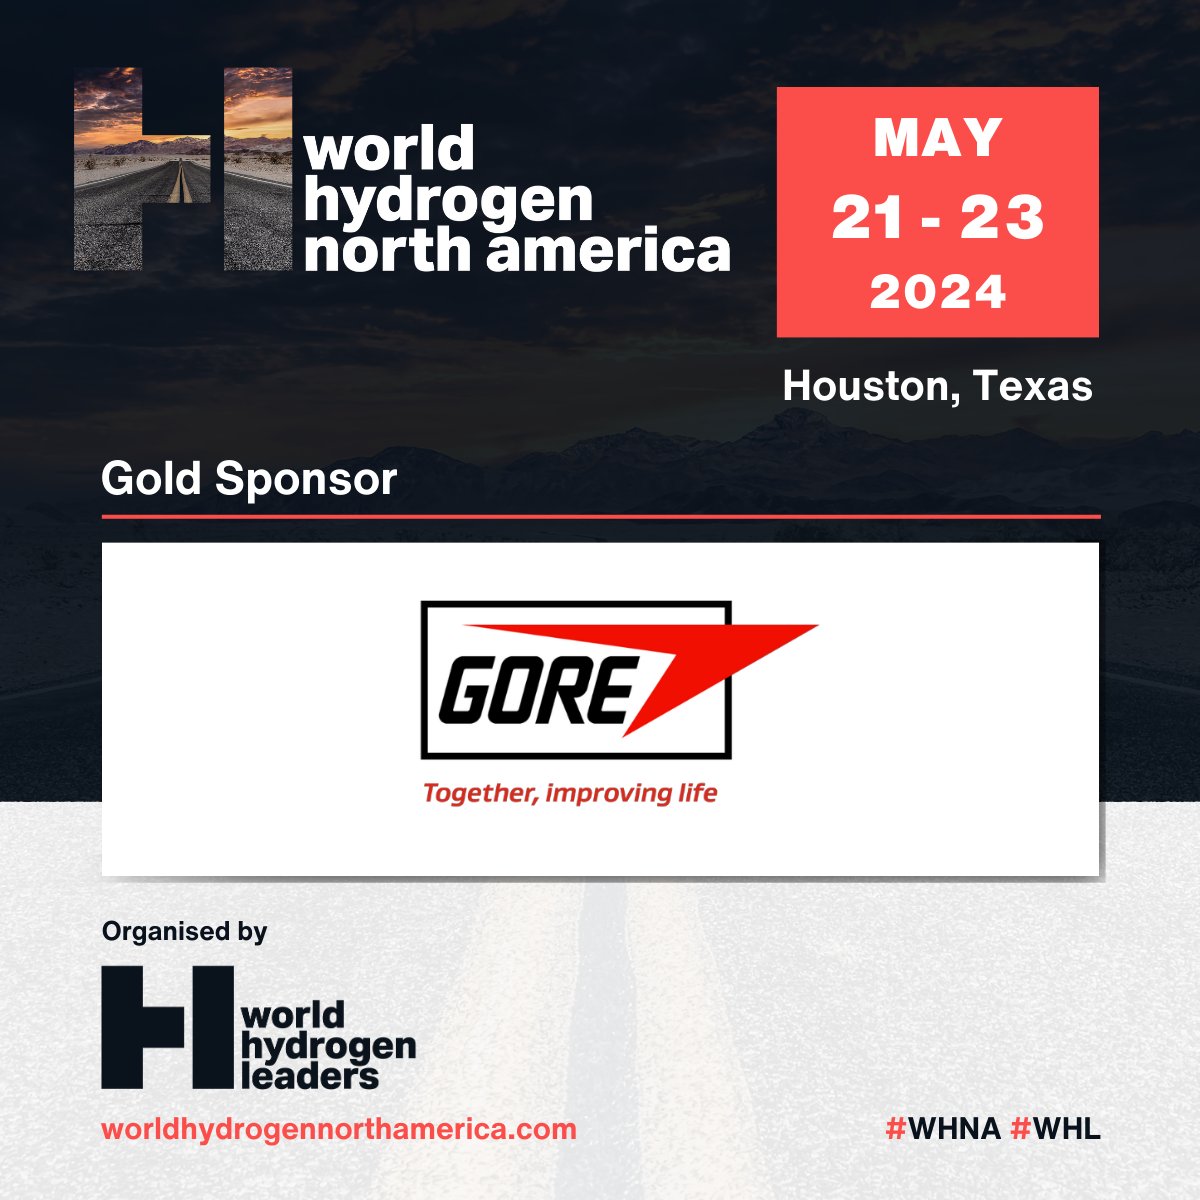 👐 We're happy to have Gore & Associates as a Gold Sponsor of #WorldHydrogenNorthAmerica, taking place from May 21-23 in Houston! For more on Gore, visit: gore.com 🎟️ Register by THIS FRIDAY, April 26 to SAVE up to $700 on #WHNA passes: worldhydrogennorthamerica.com/event/b9129970…